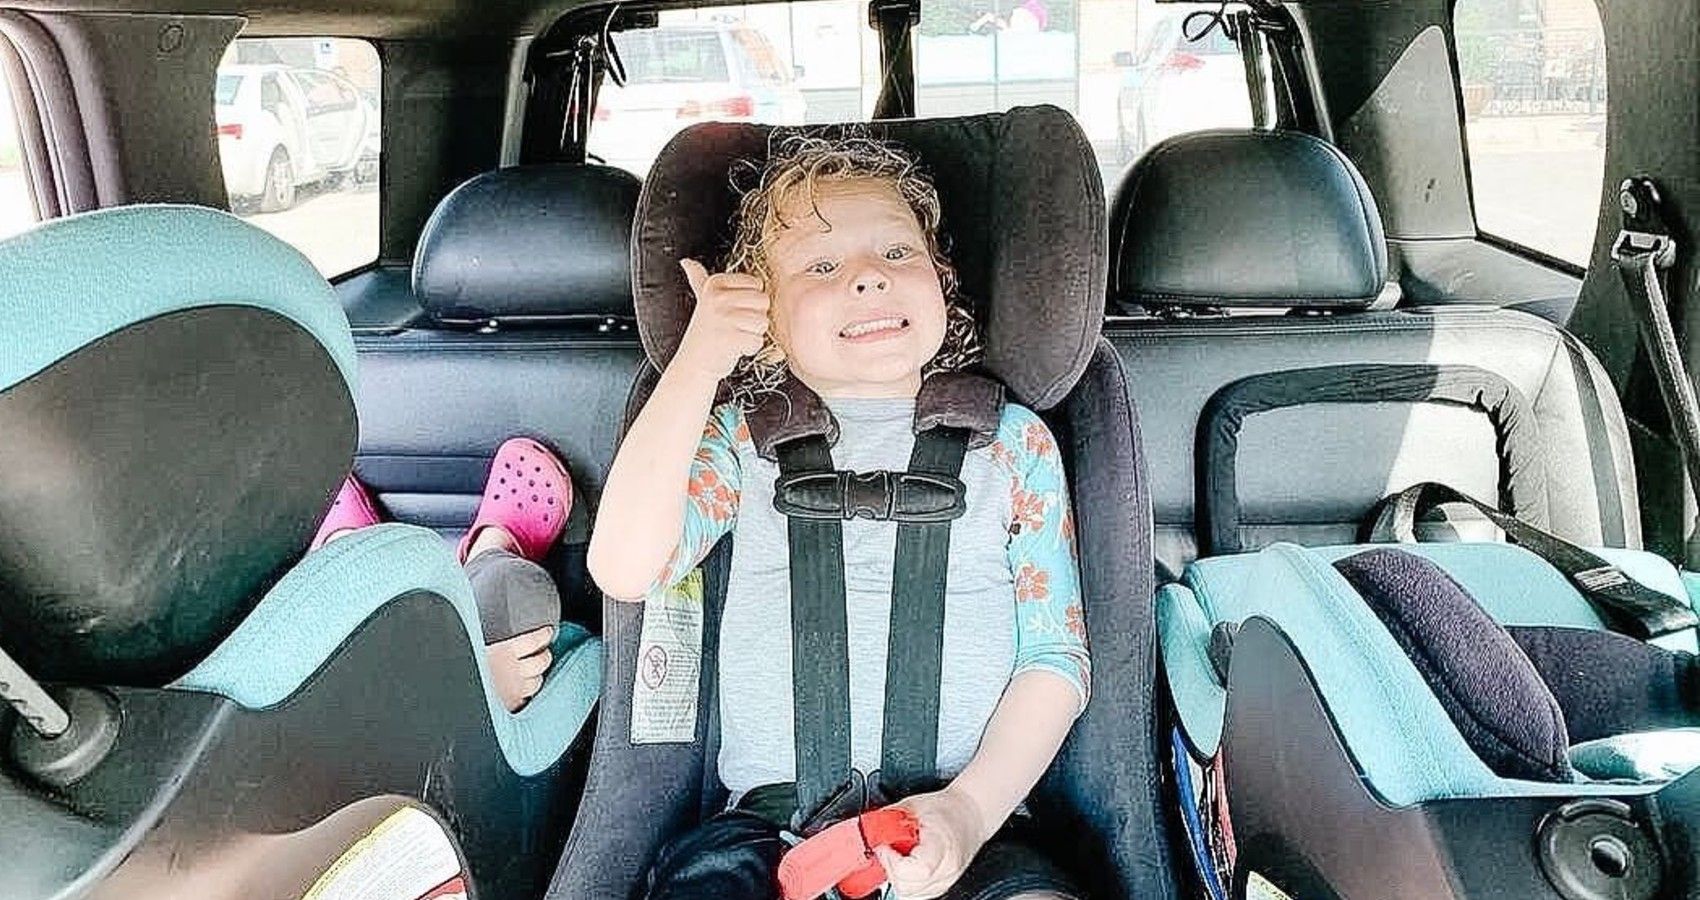 A child in her car seat giving a thumbs up